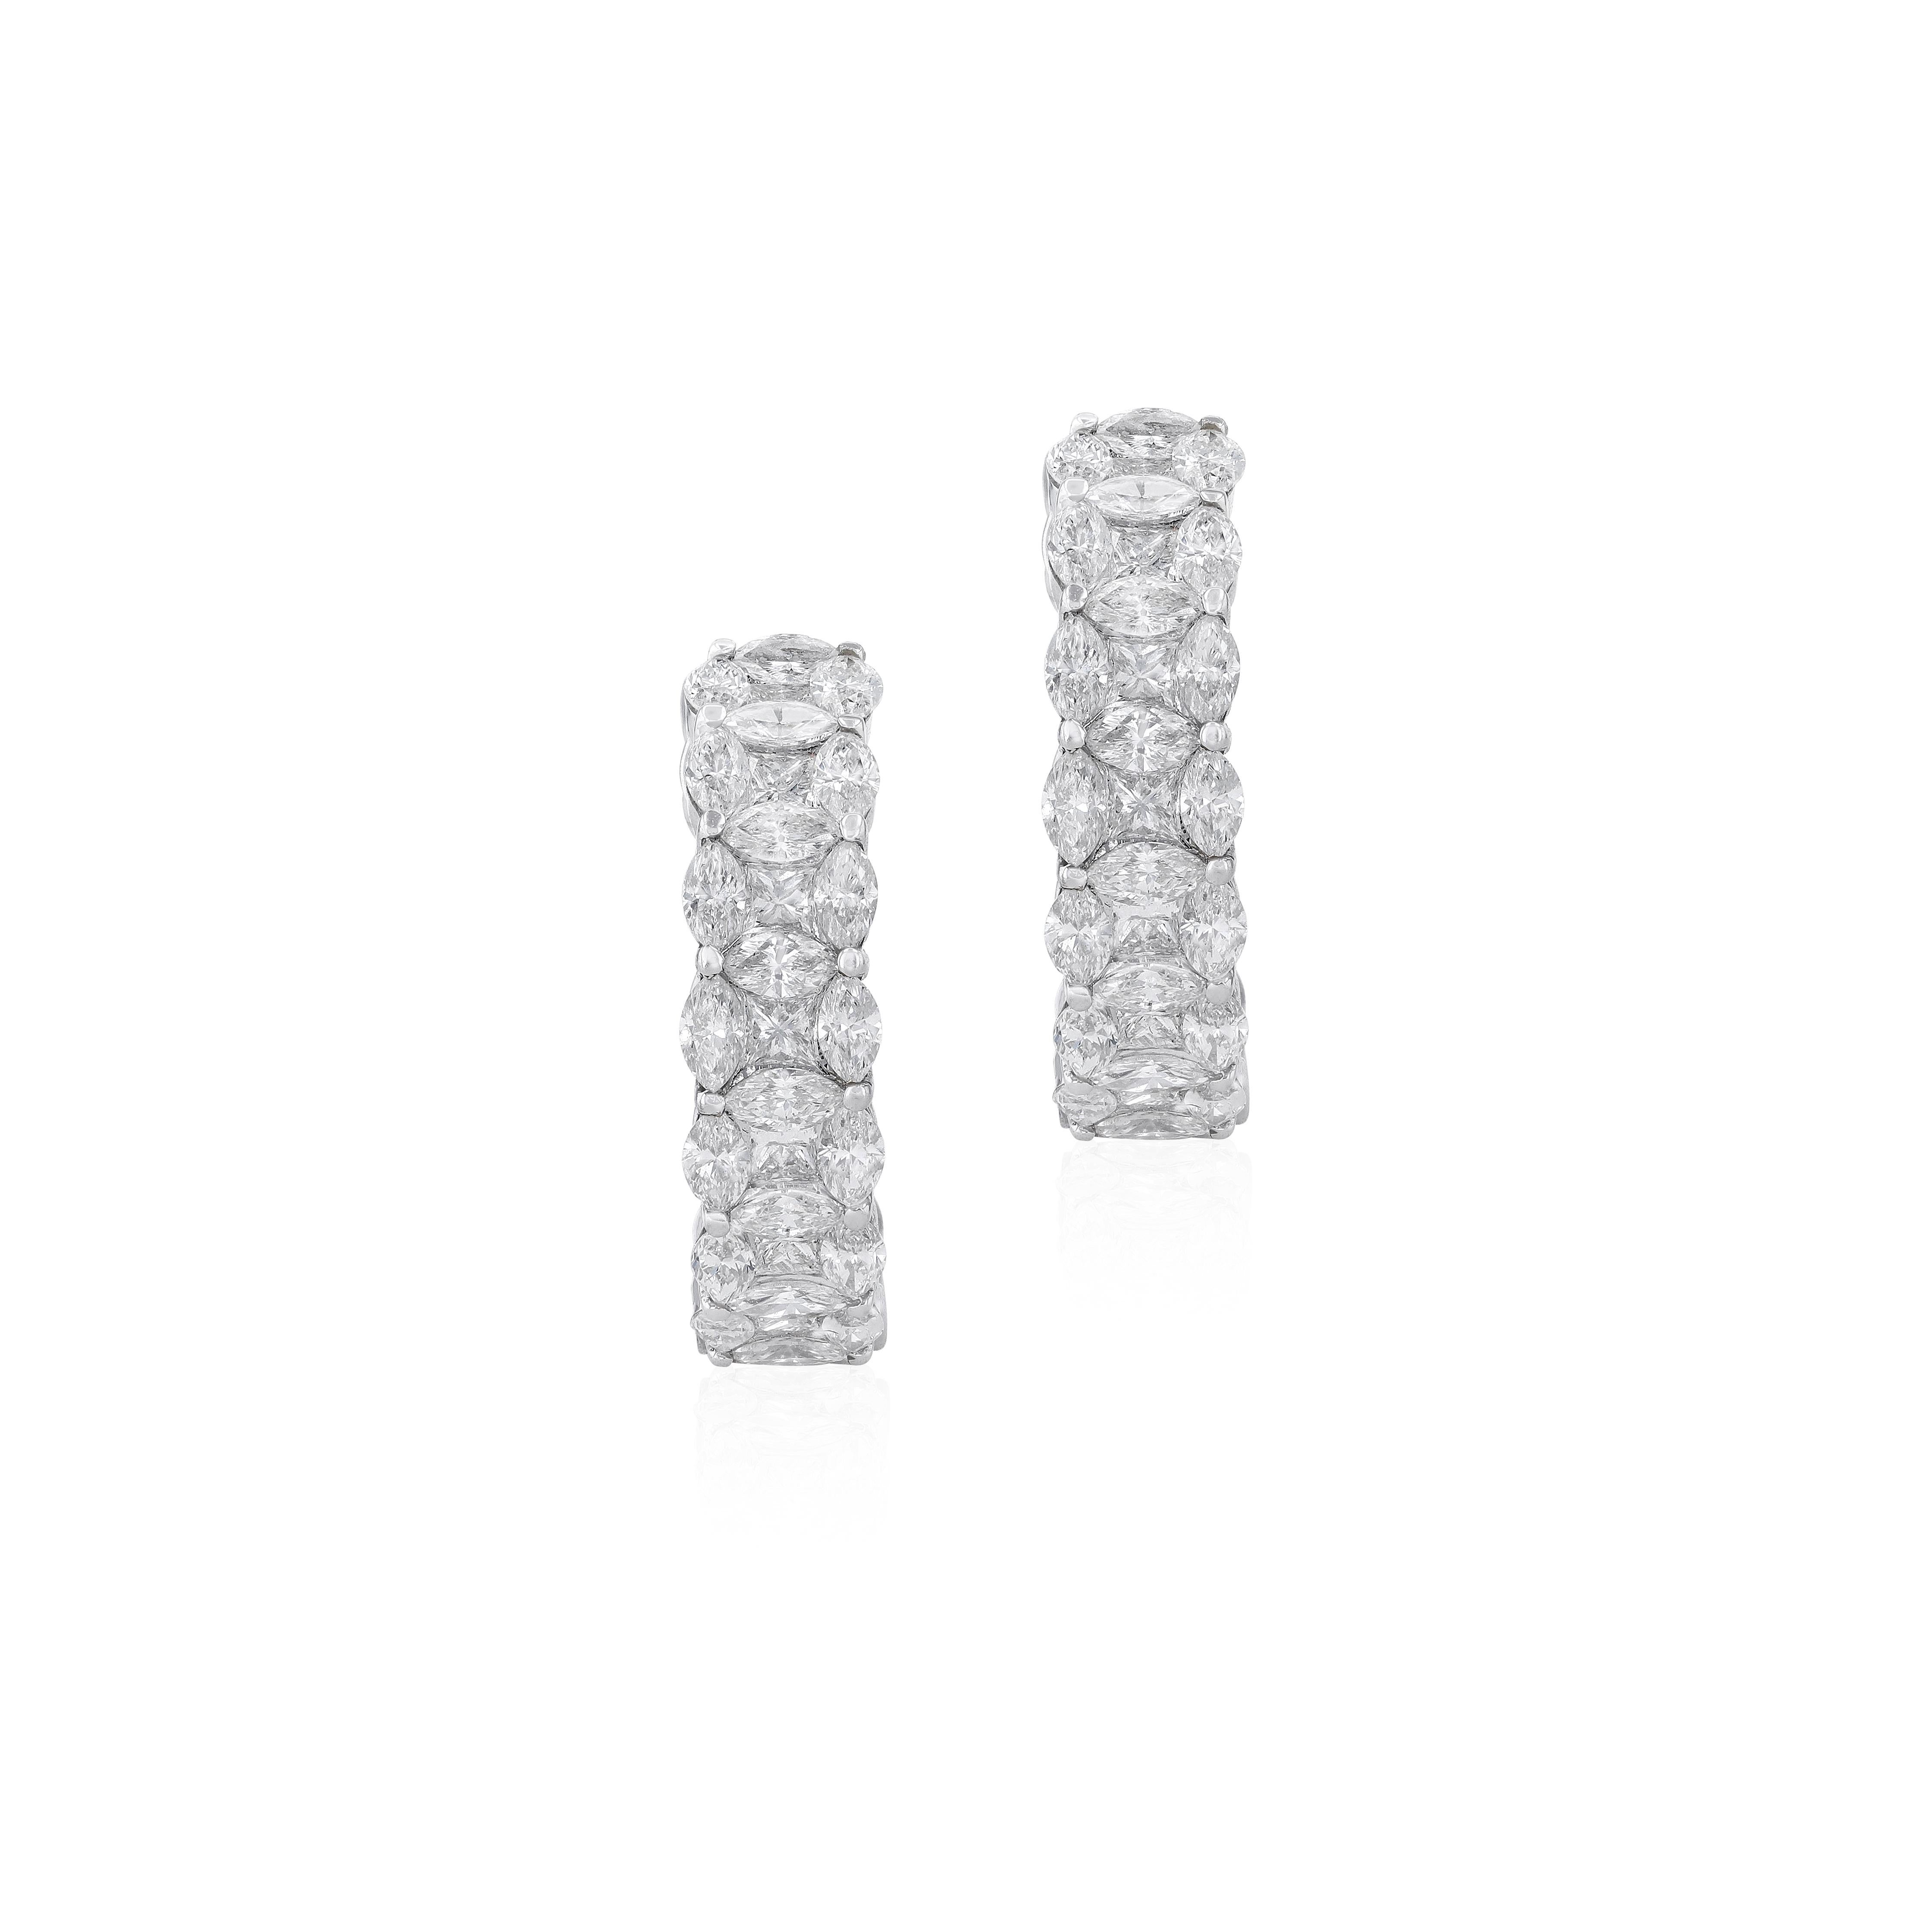 A fascinating twist on the classic hoop earring, the impactful design of this 18 karat white gold earrings features dynamic spirals set with round diamonds. Bringing a  diamond sparkle to each ear, our hoop earrings create a dramatic